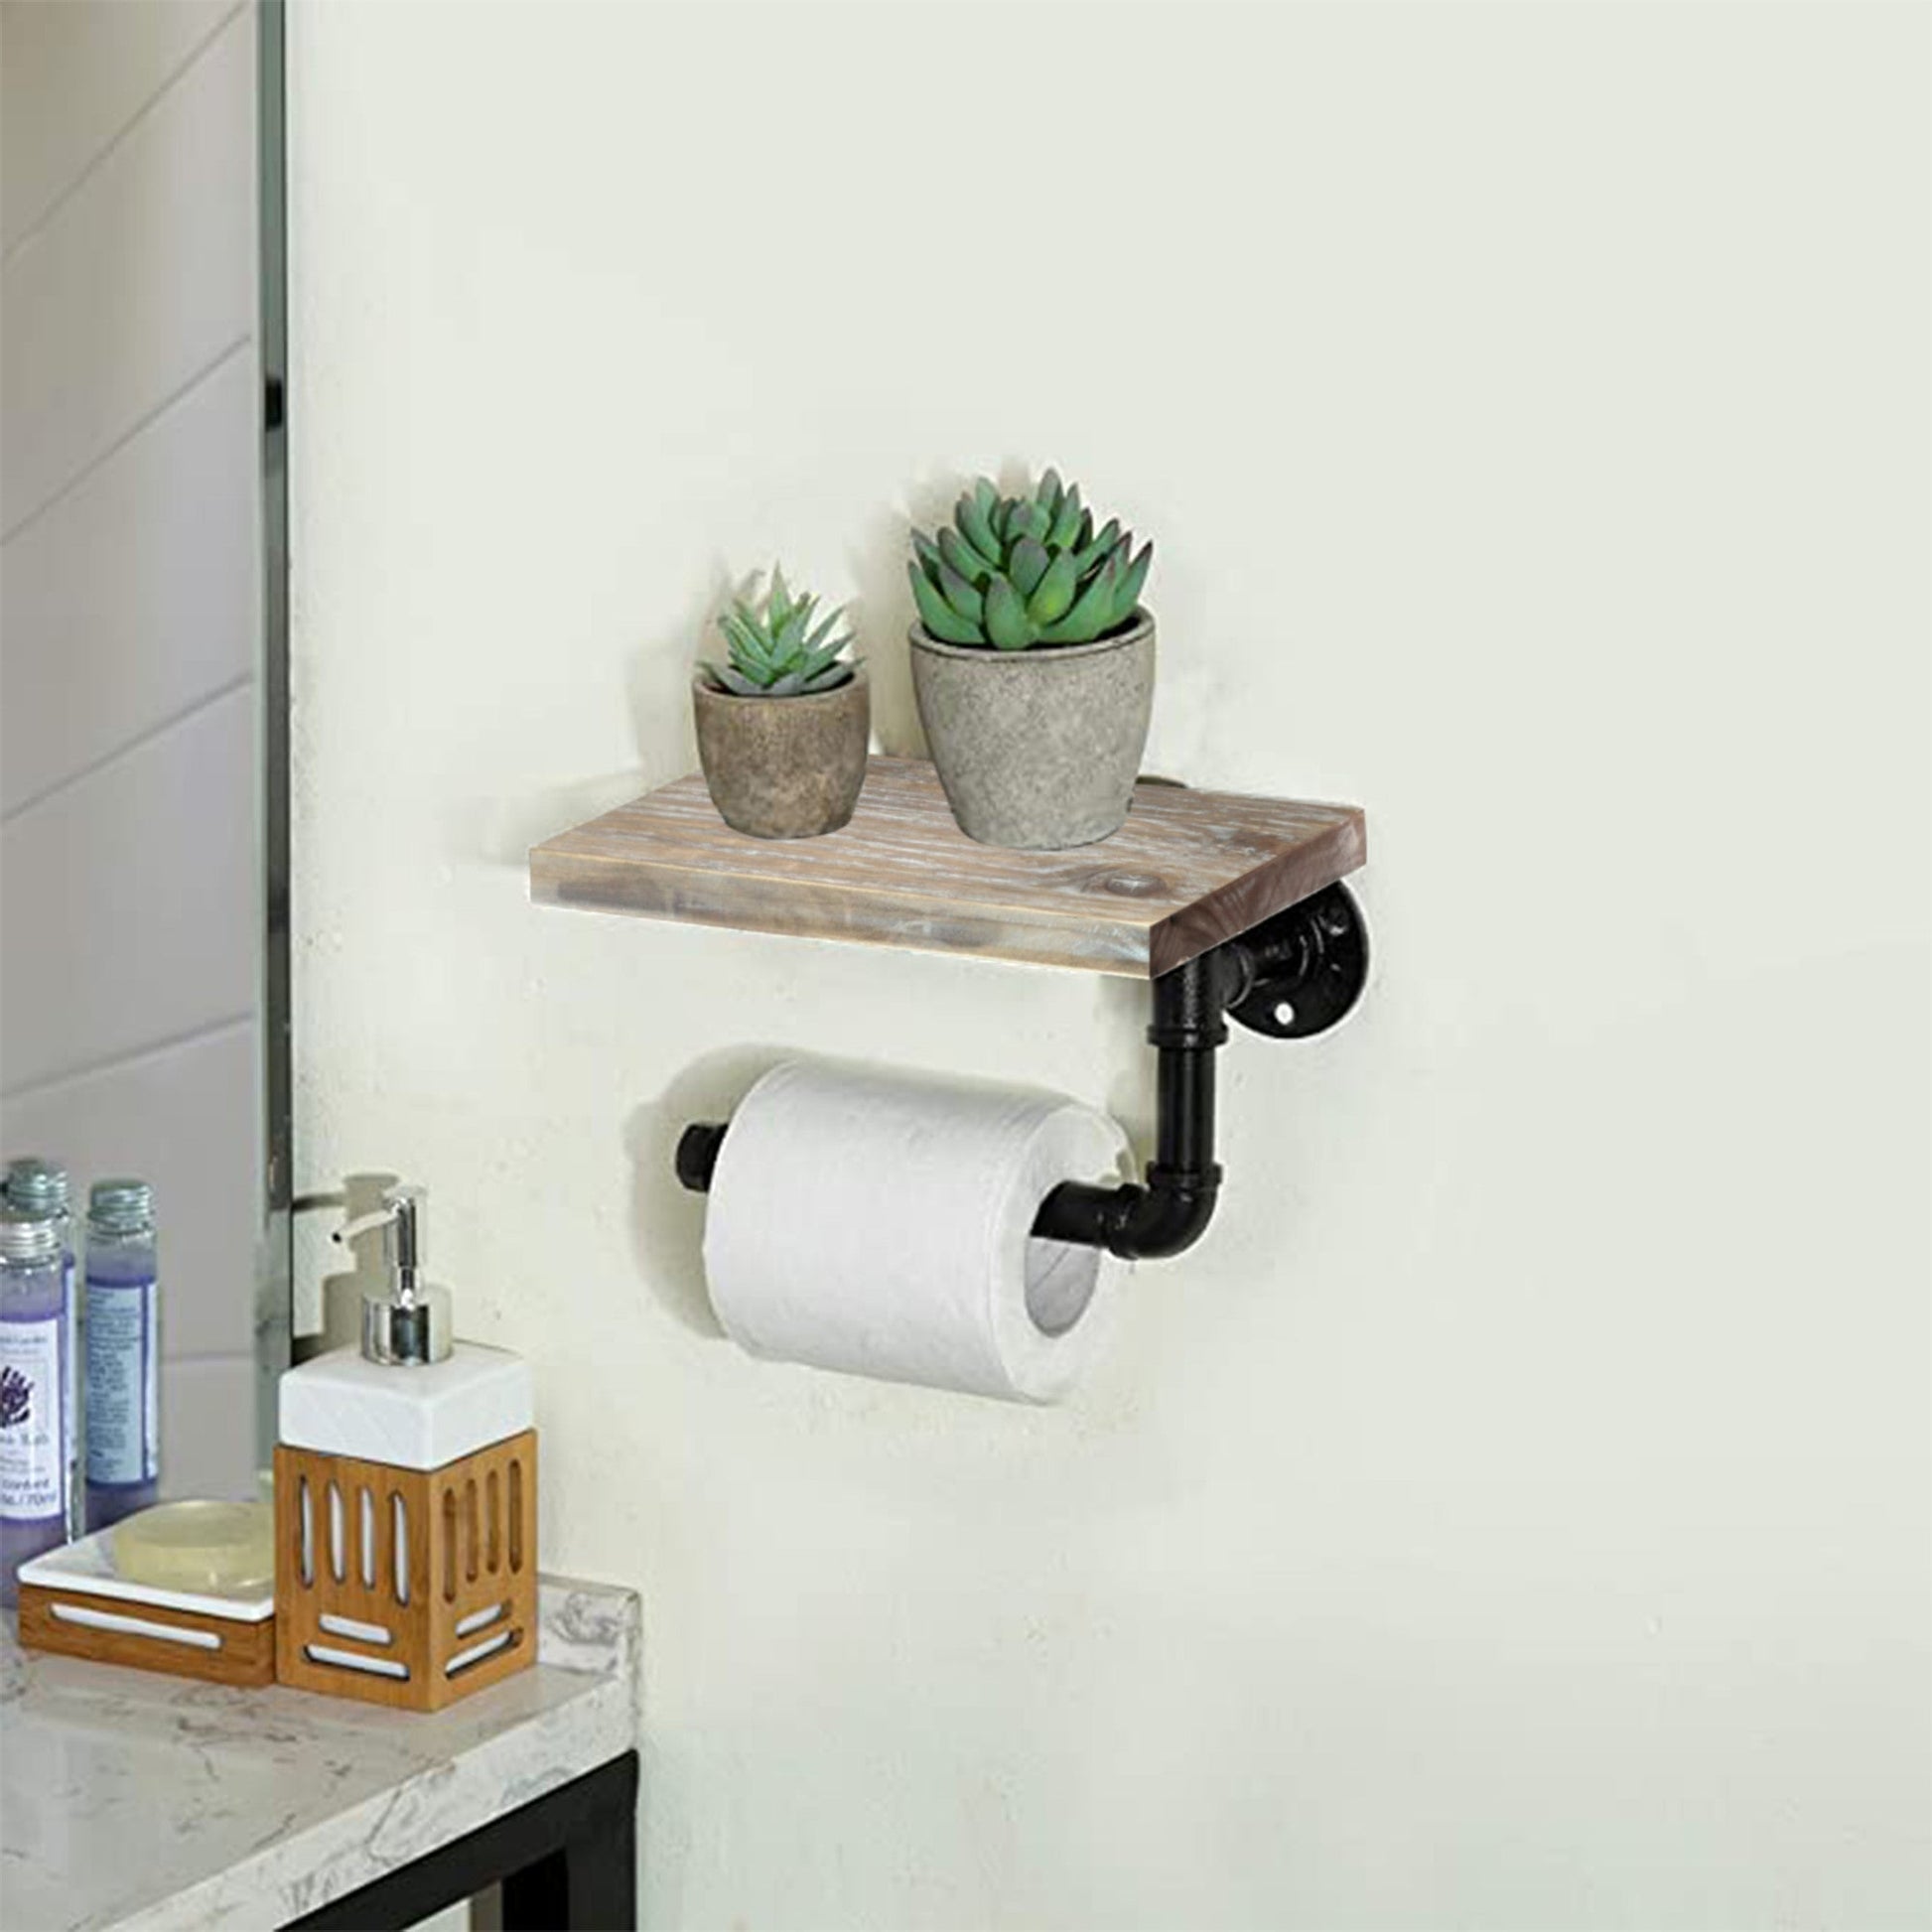 [9.8 in - Rustic Brown] Industrial Toilet Paper Holder with Shelf, - Gizgizmo